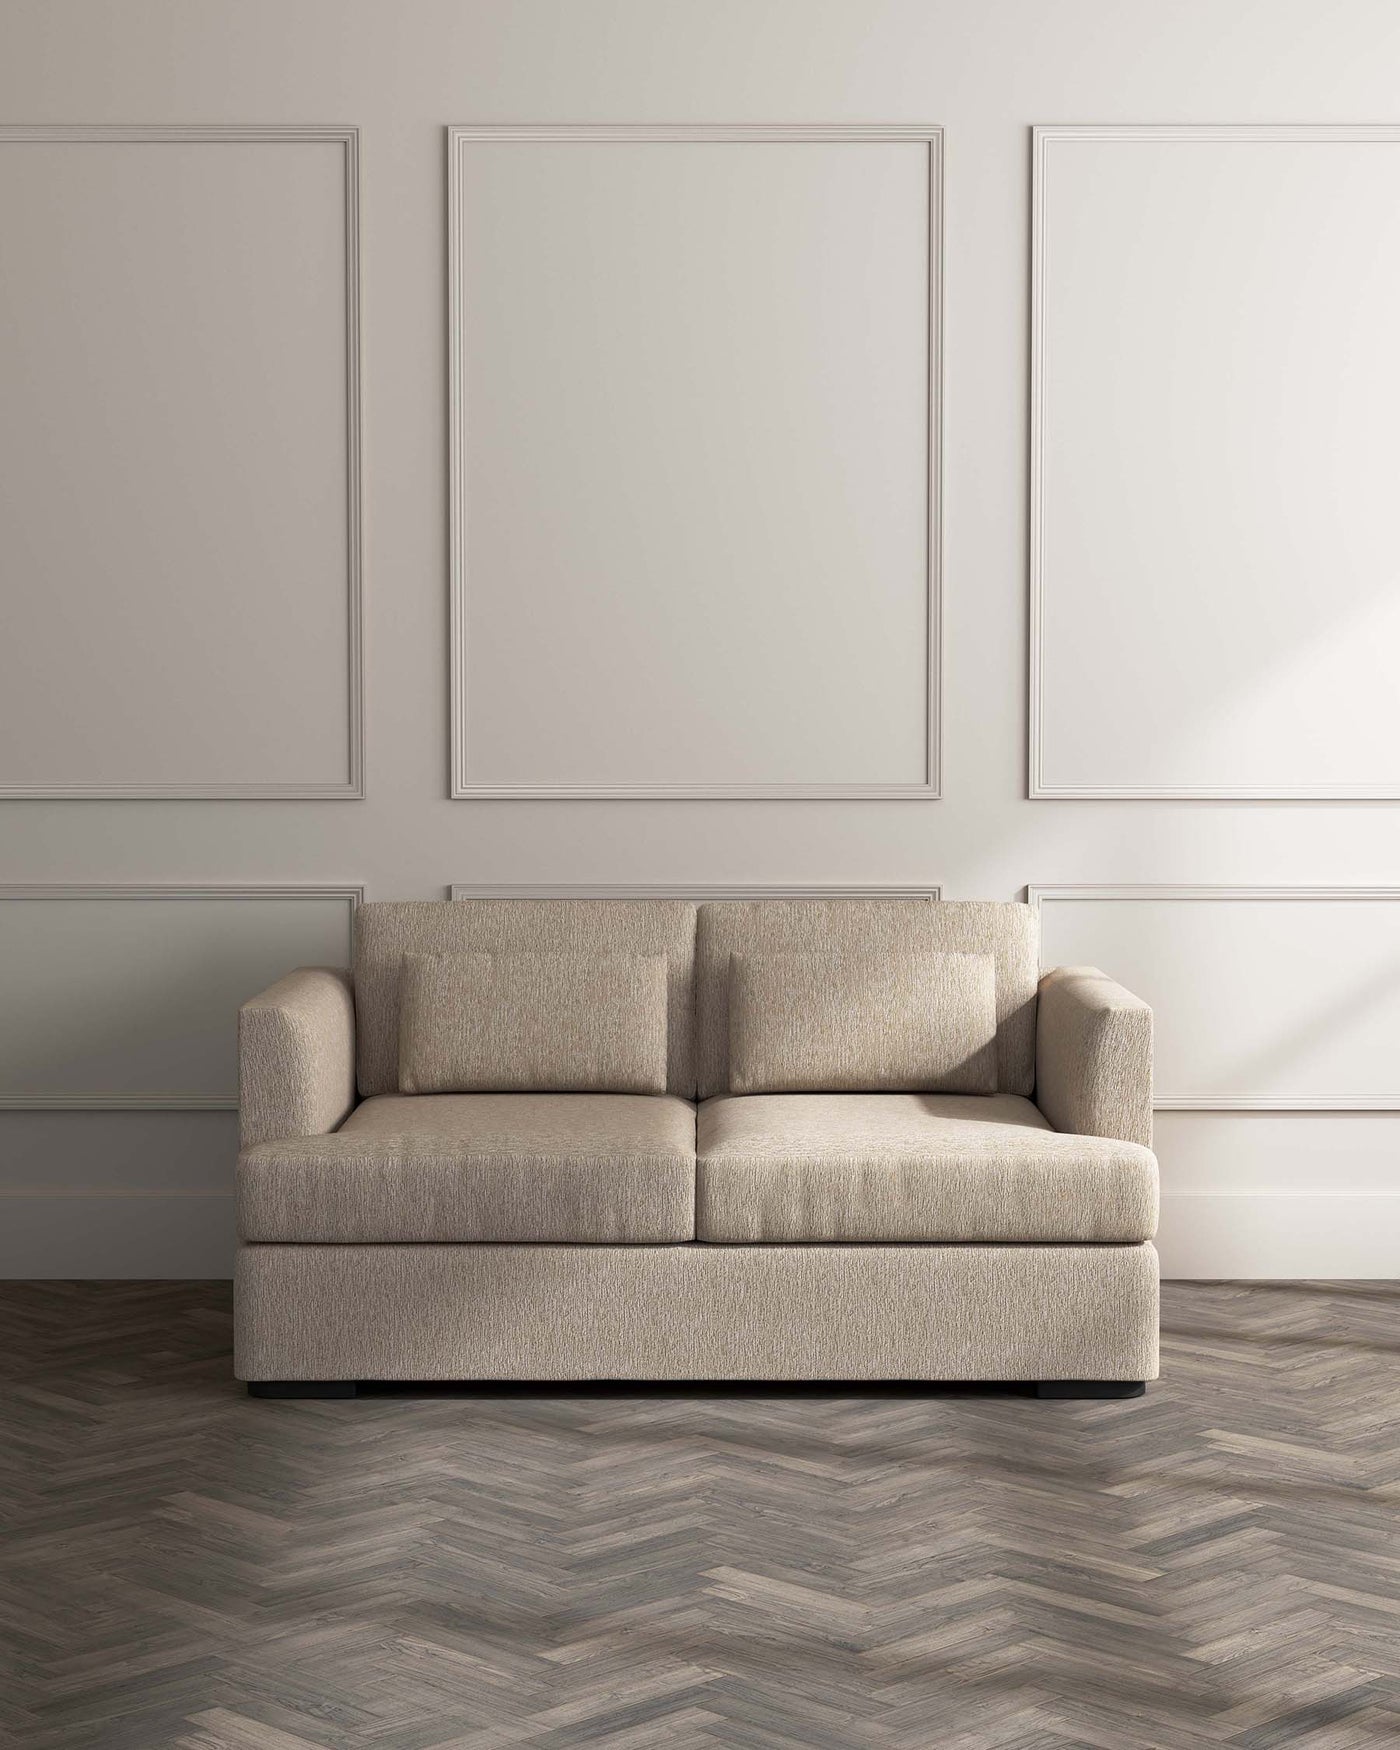 Contemporary three-seater sofa with textured beige upholstery and clean, straight lines, positioned in a minimalist room with herringbone pattern wooden flooring.